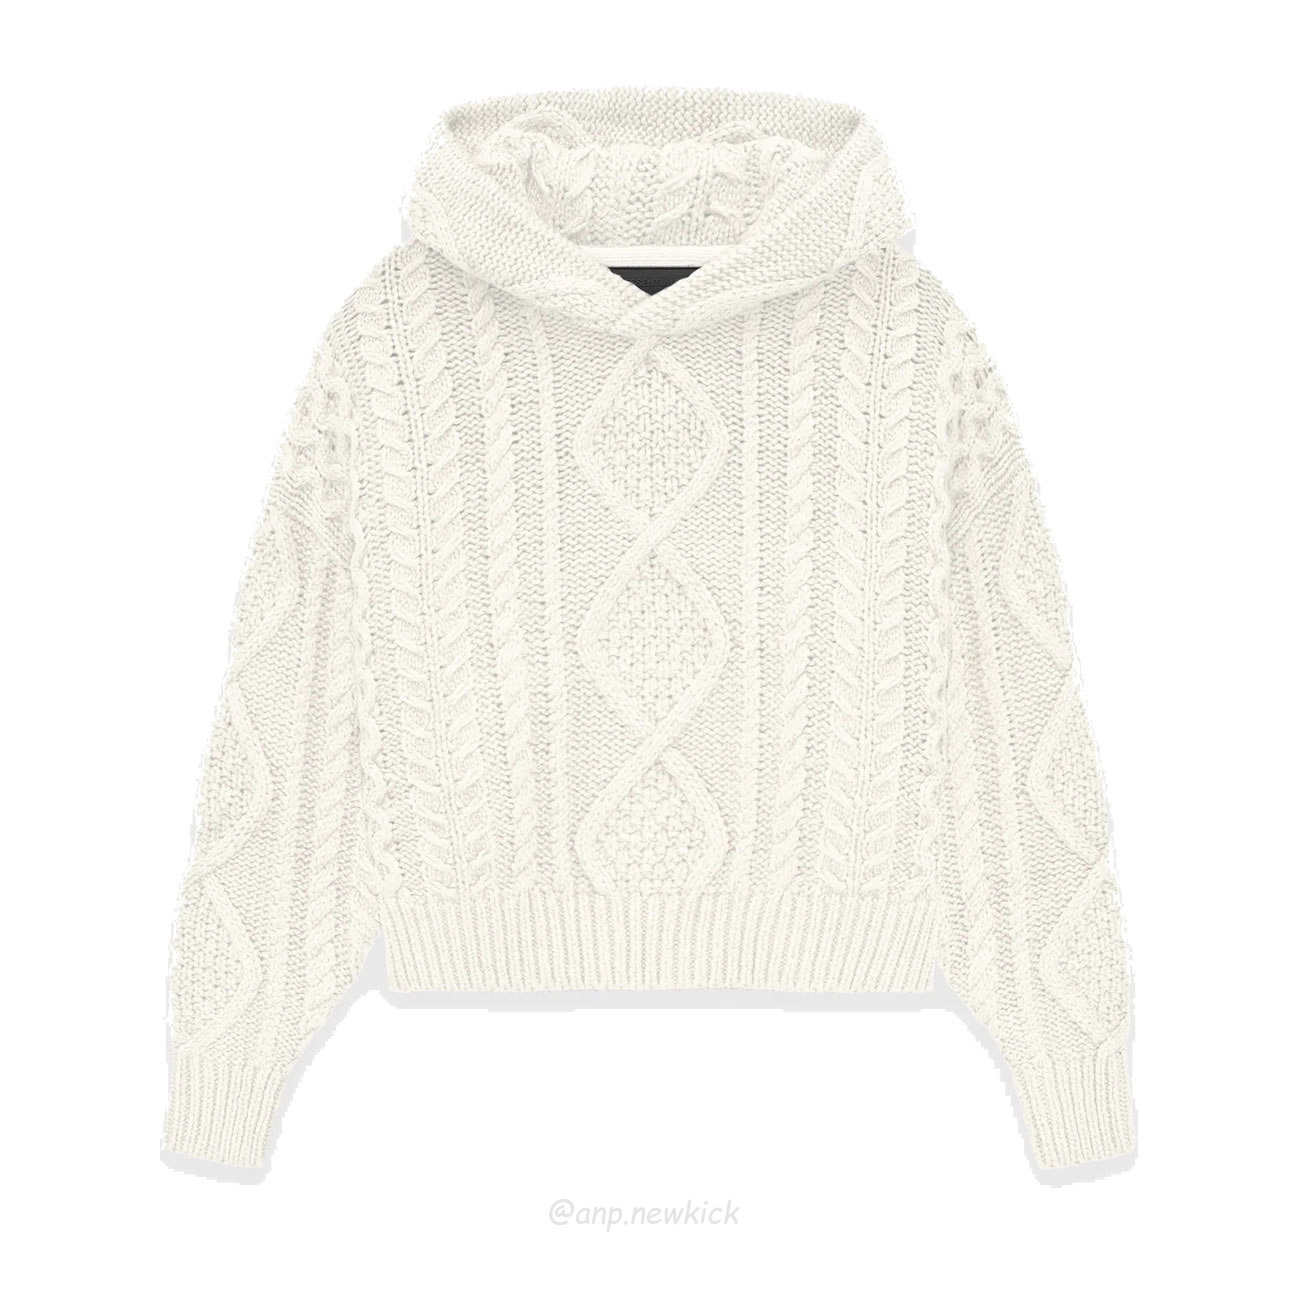 Fear Of God Essentials Fog 23fw New Collection Of Hooded Sweaters In Black Elephant White Beige White S Xl (3) - newkick.org